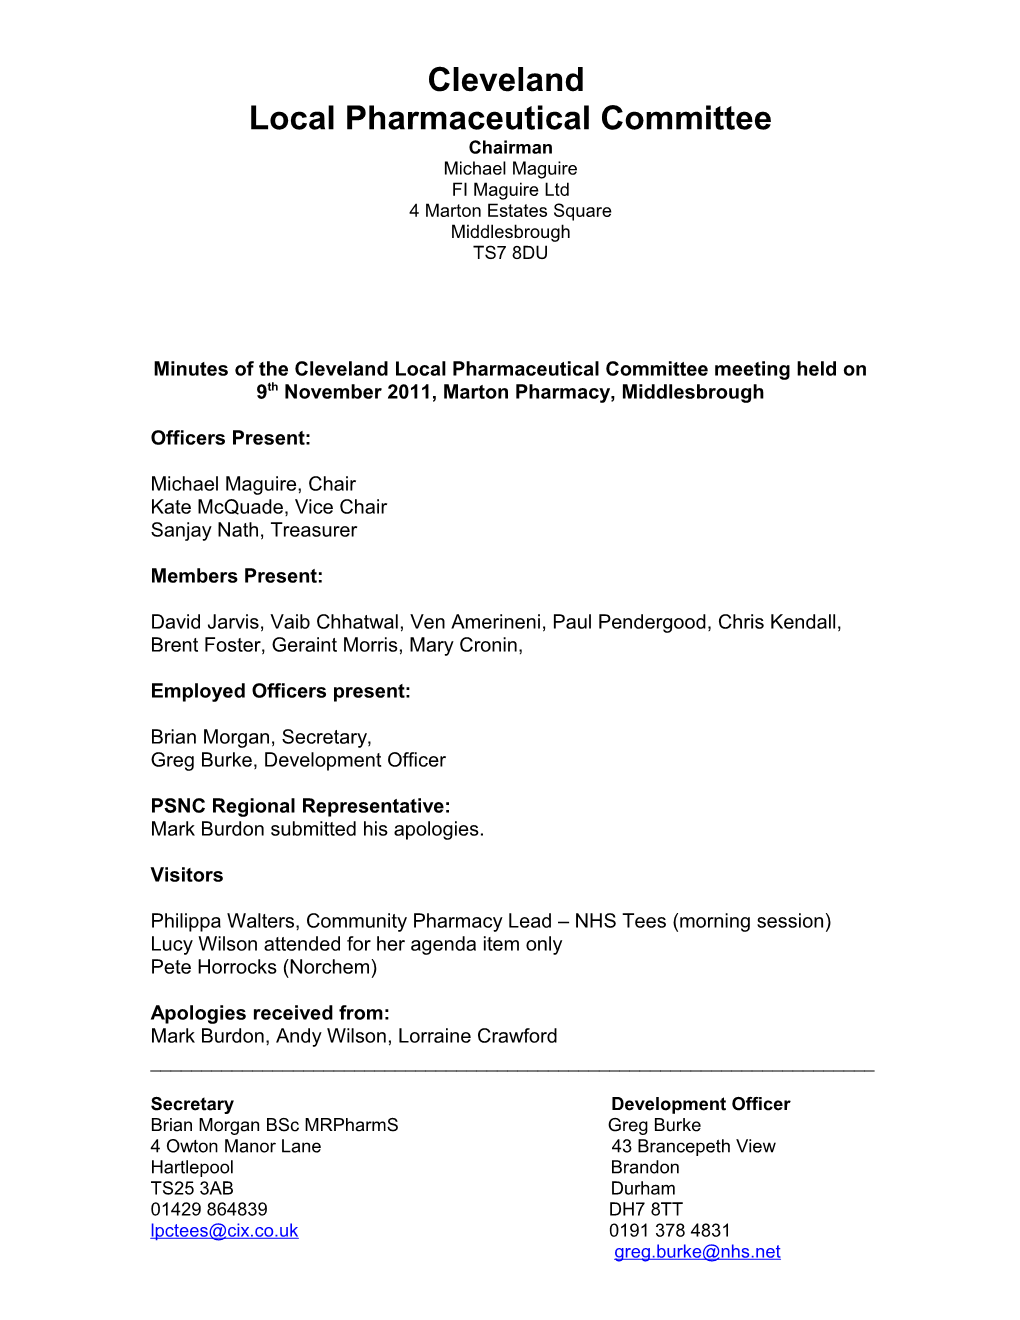 Minutes of the Cleveland Local Pharmaceutical Committee Meeting Held on 14Th July 2010